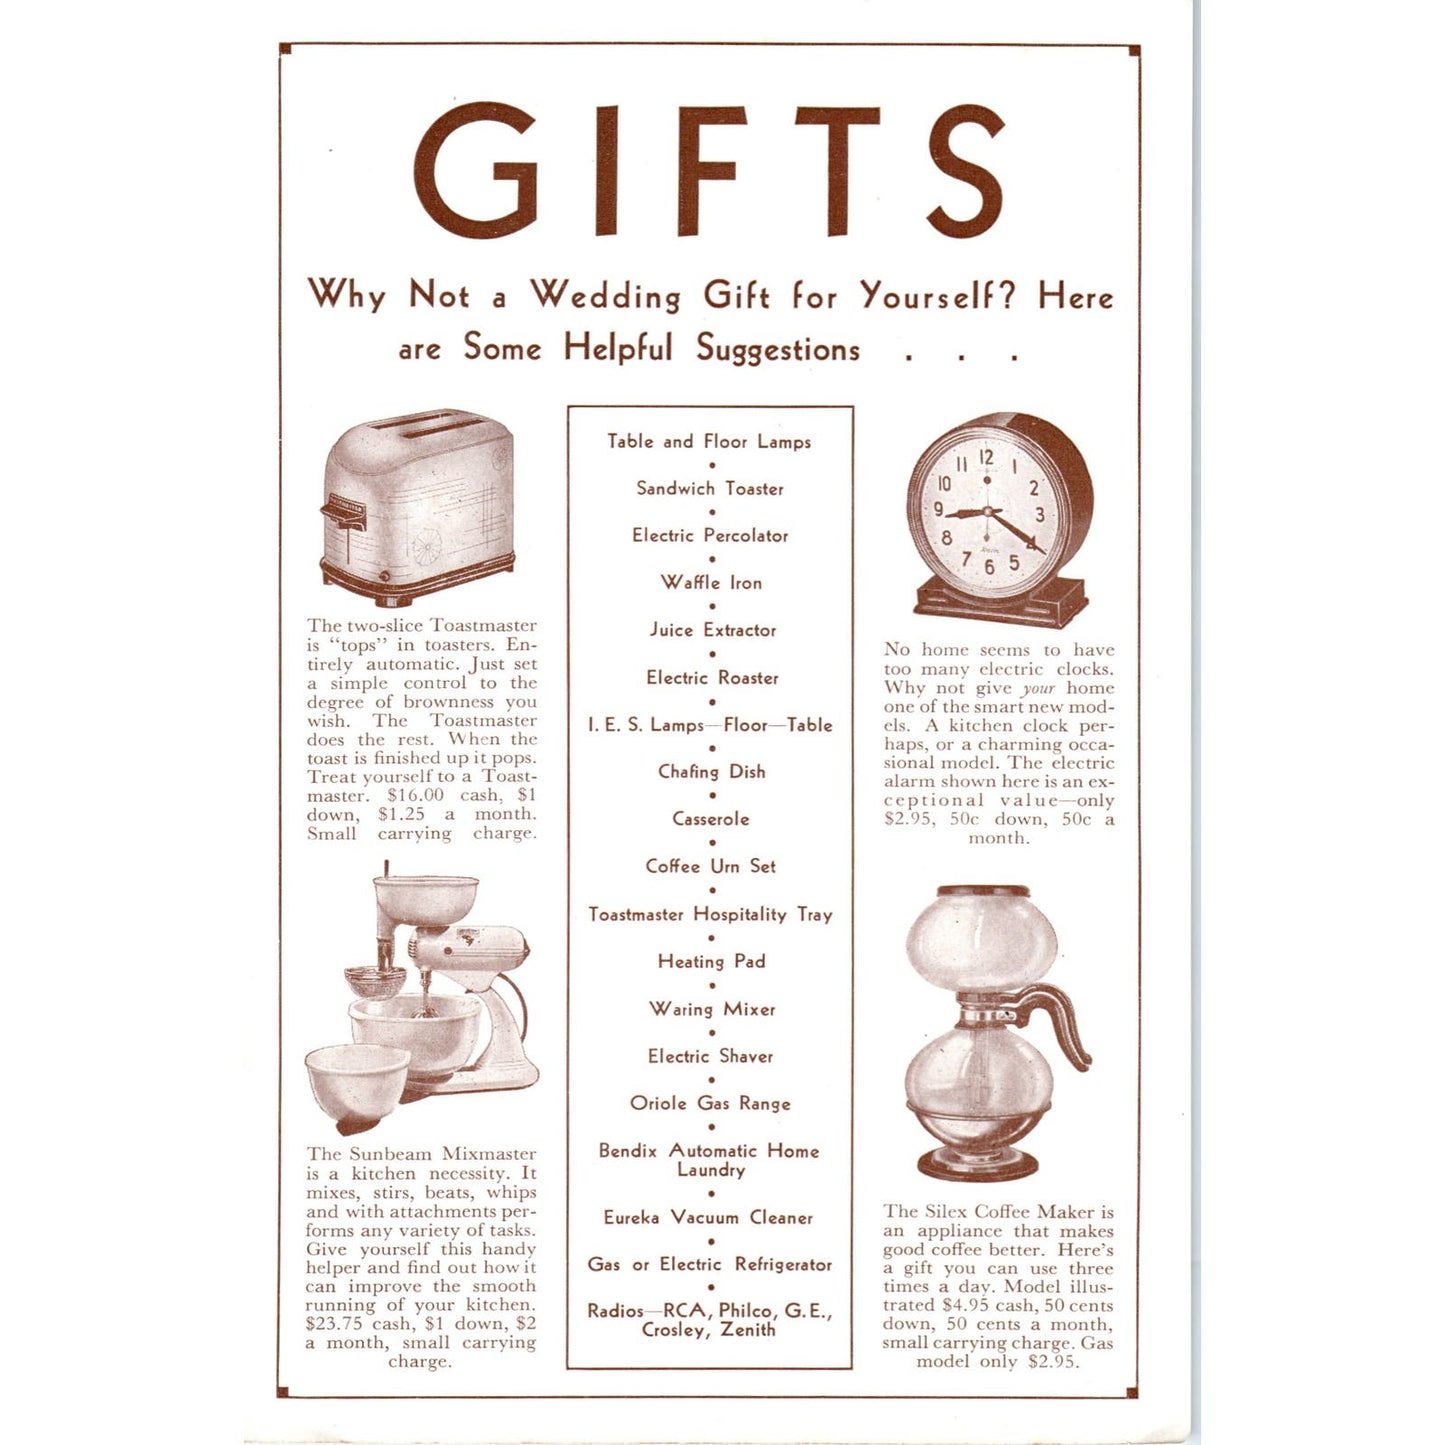 1930s Art Deco Home Appliance Wedding Gifts Advertising Leaflet Hot-O-Matic AB9